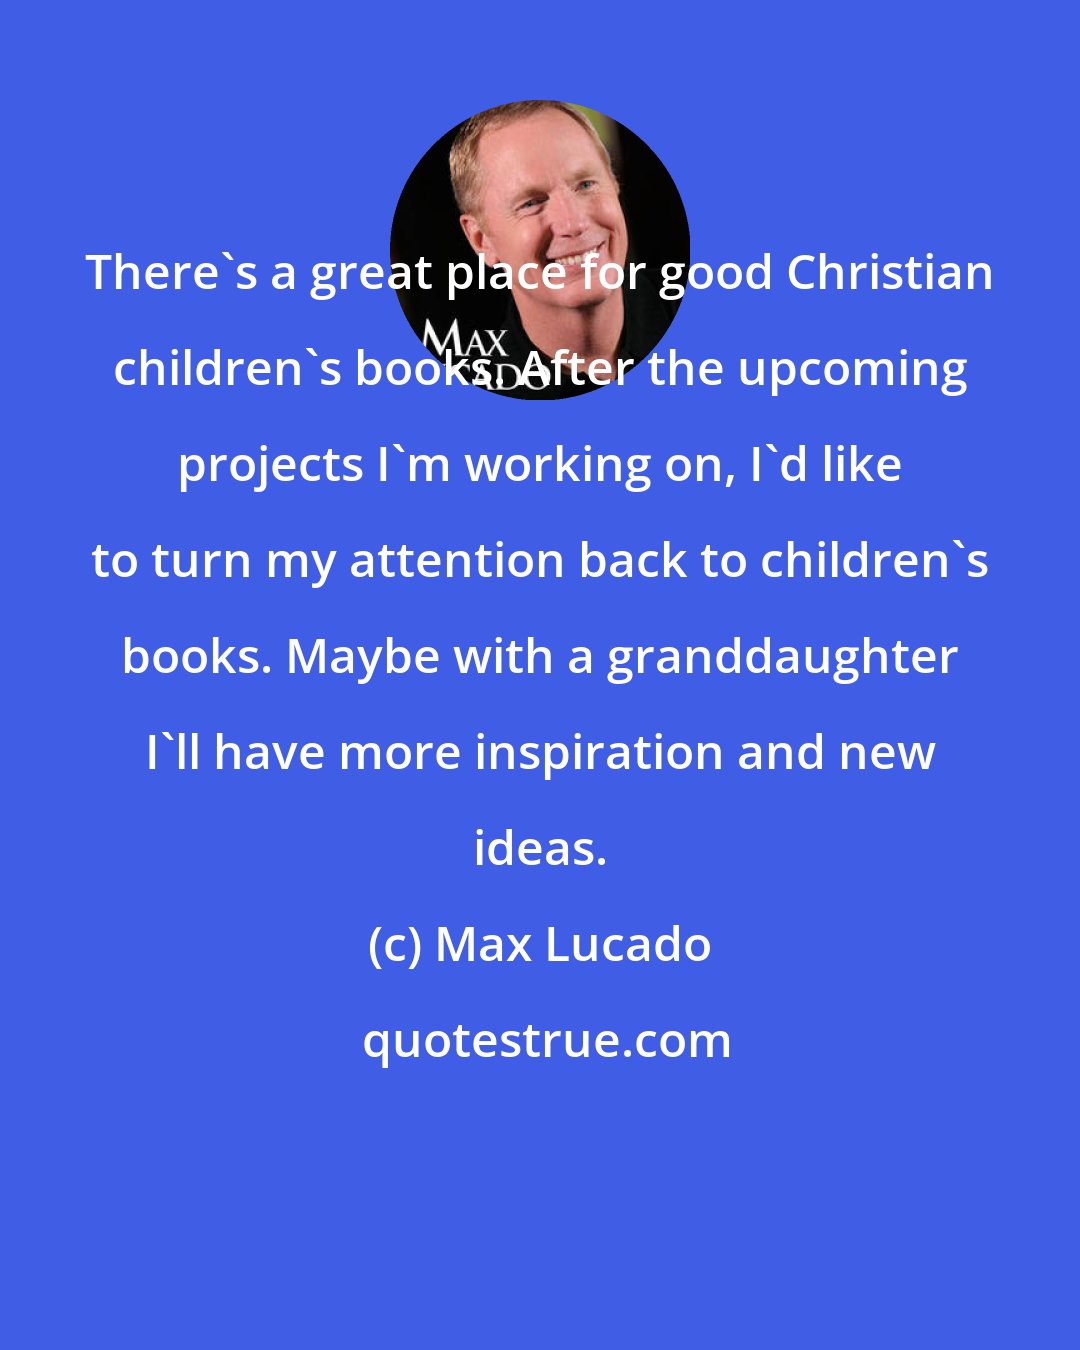 Max Lucado: There's a great place for good Christian children's books. After the upcoming projects I'm working on, I'd like to turn my attention back to children's books. Maybe with a granddaughter I'll have more inspiration and new ideas.